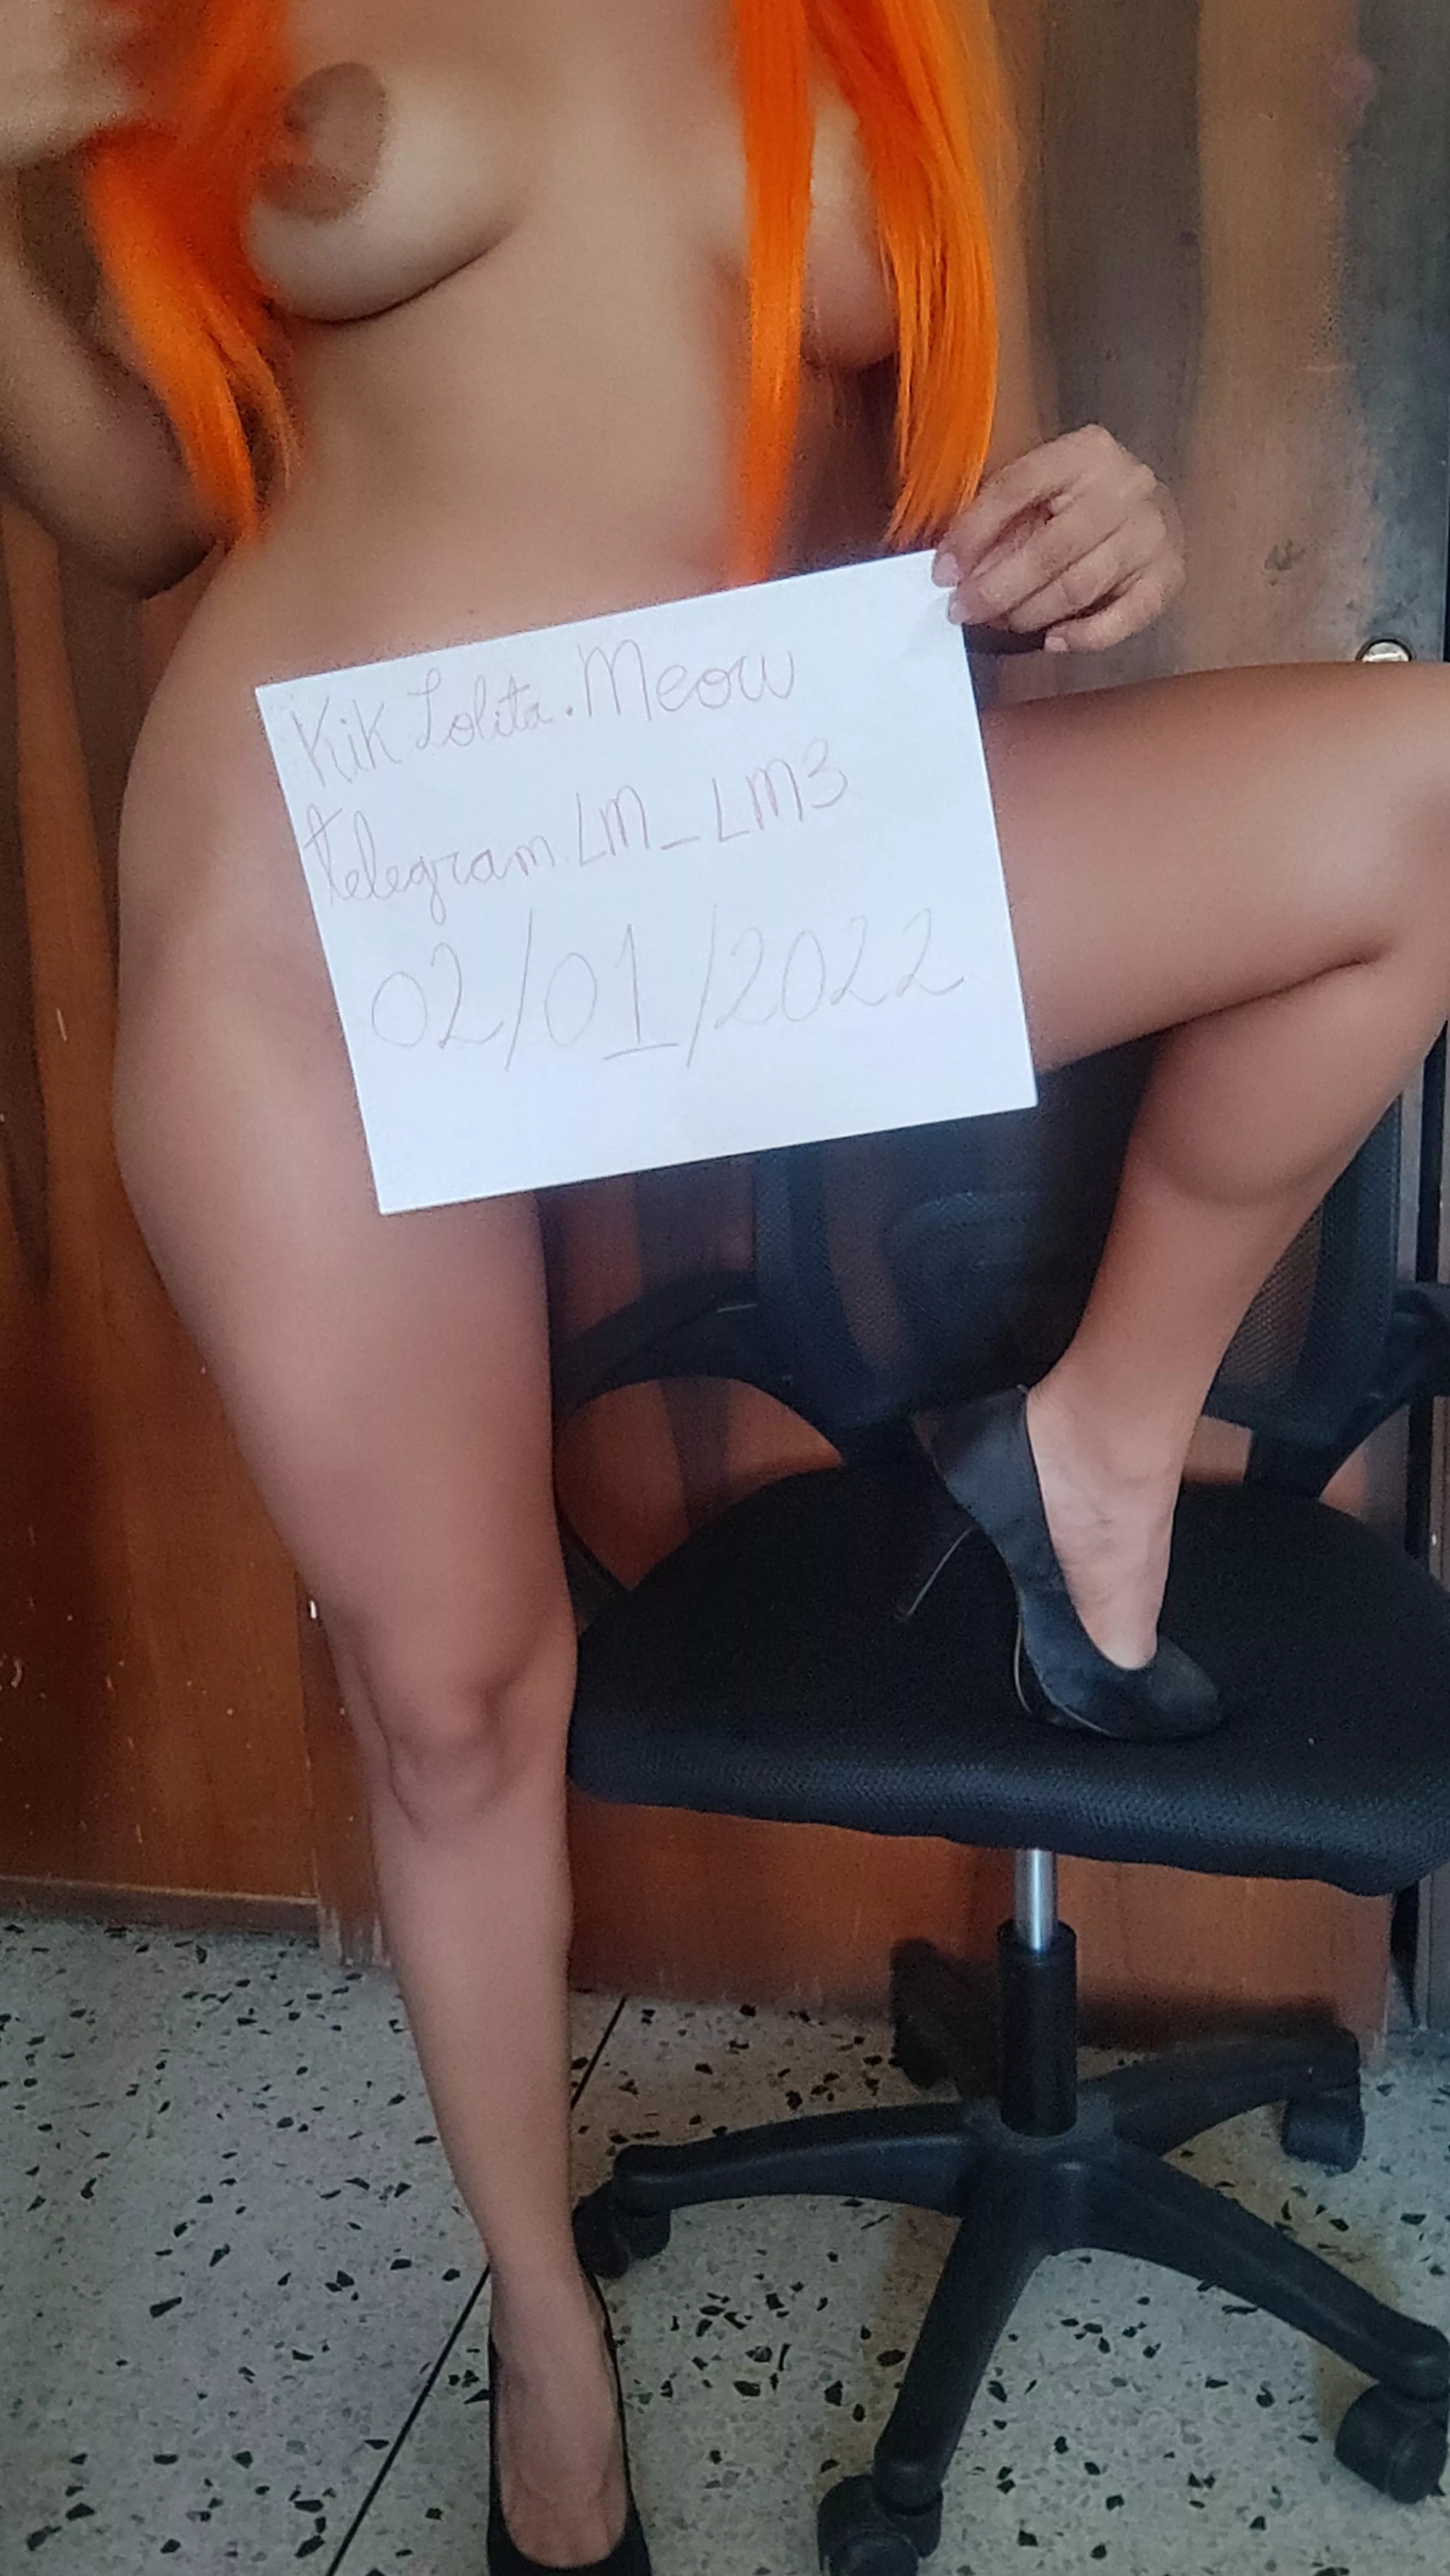 🧡PICS 🧡Long HD vids (sex tapes, masturbation, blowjod, fingering, stripping)🧡SEXTING 🧡📞VIDEOCALL 🧡 CUSTOM 🧡GFE 🧡ONLY $15 MY PACK 30 Pics +vids+videocall